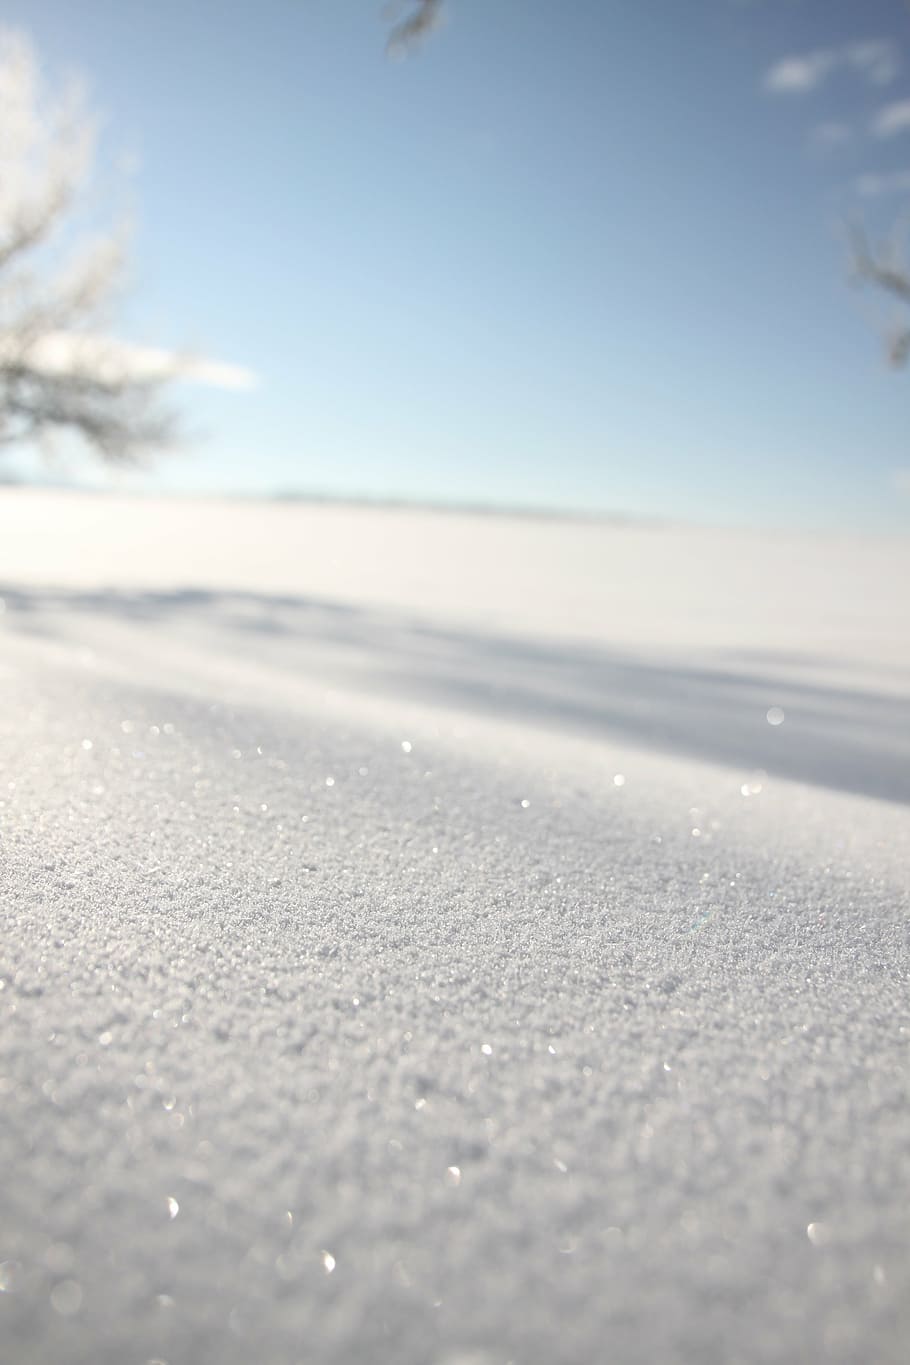 new zealand, powder snow, sparkle, winter, drifts, mood, morning, frost, nature, snow